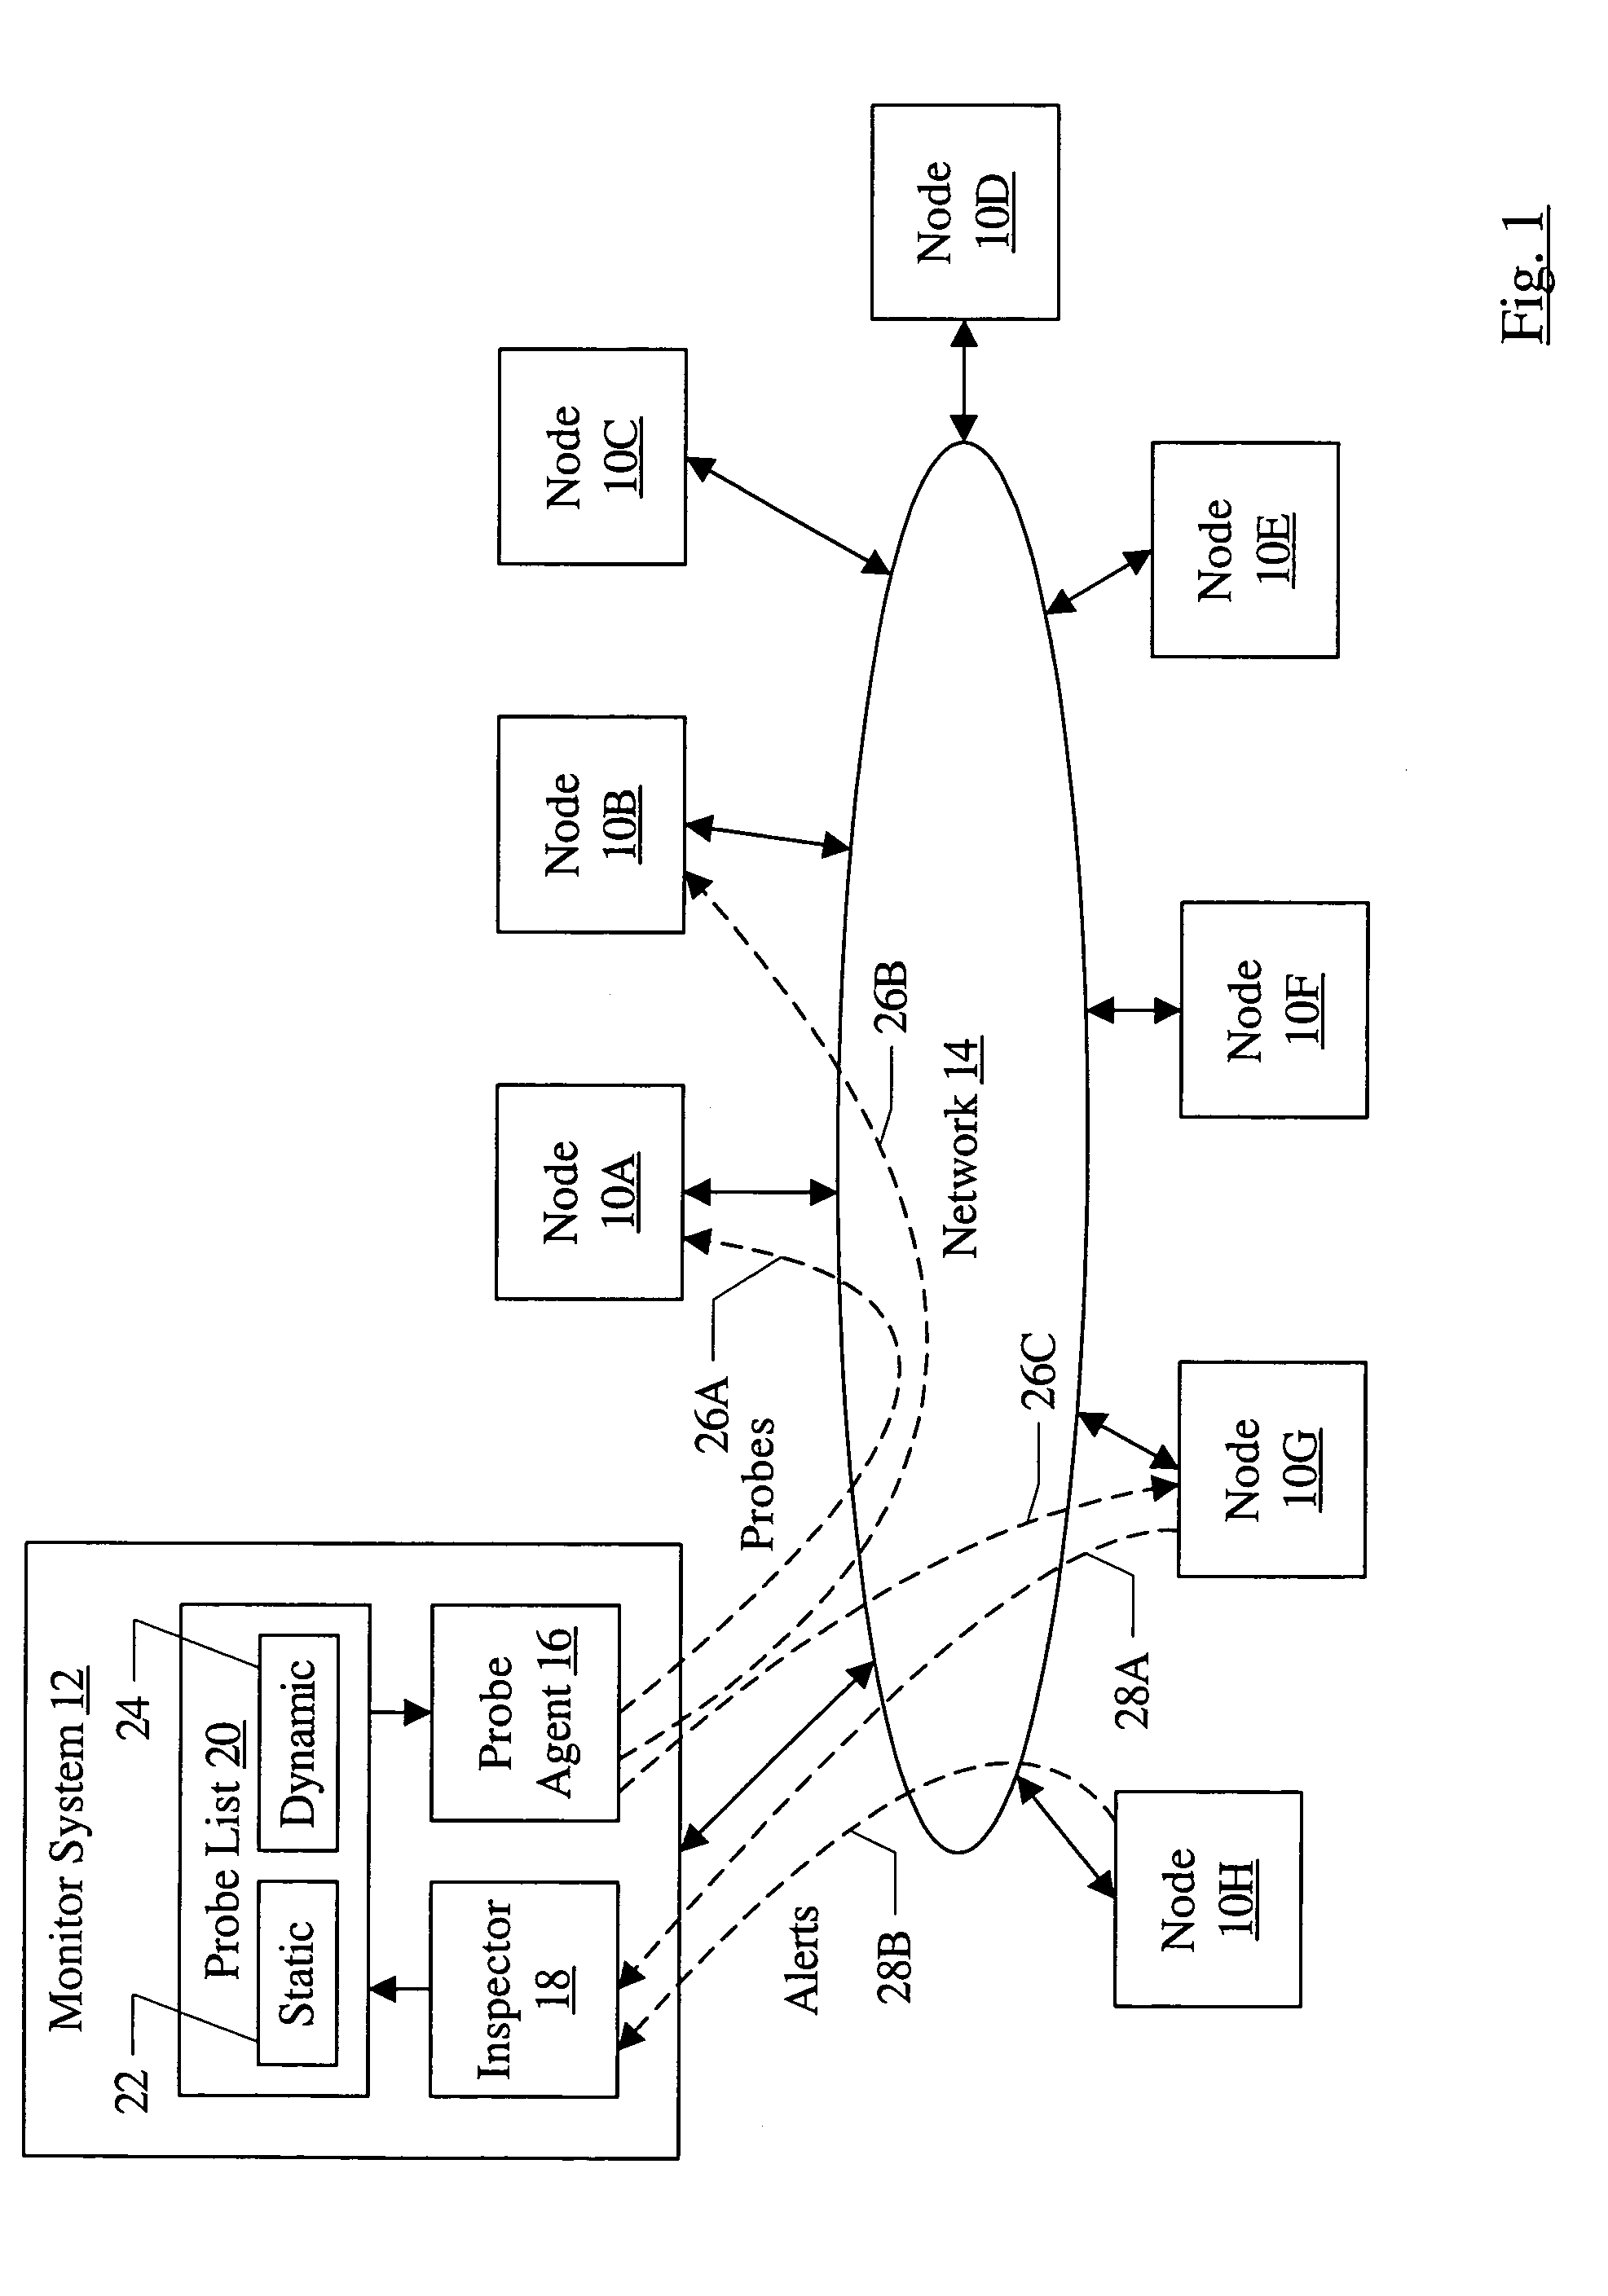 Fault isolation in large networks